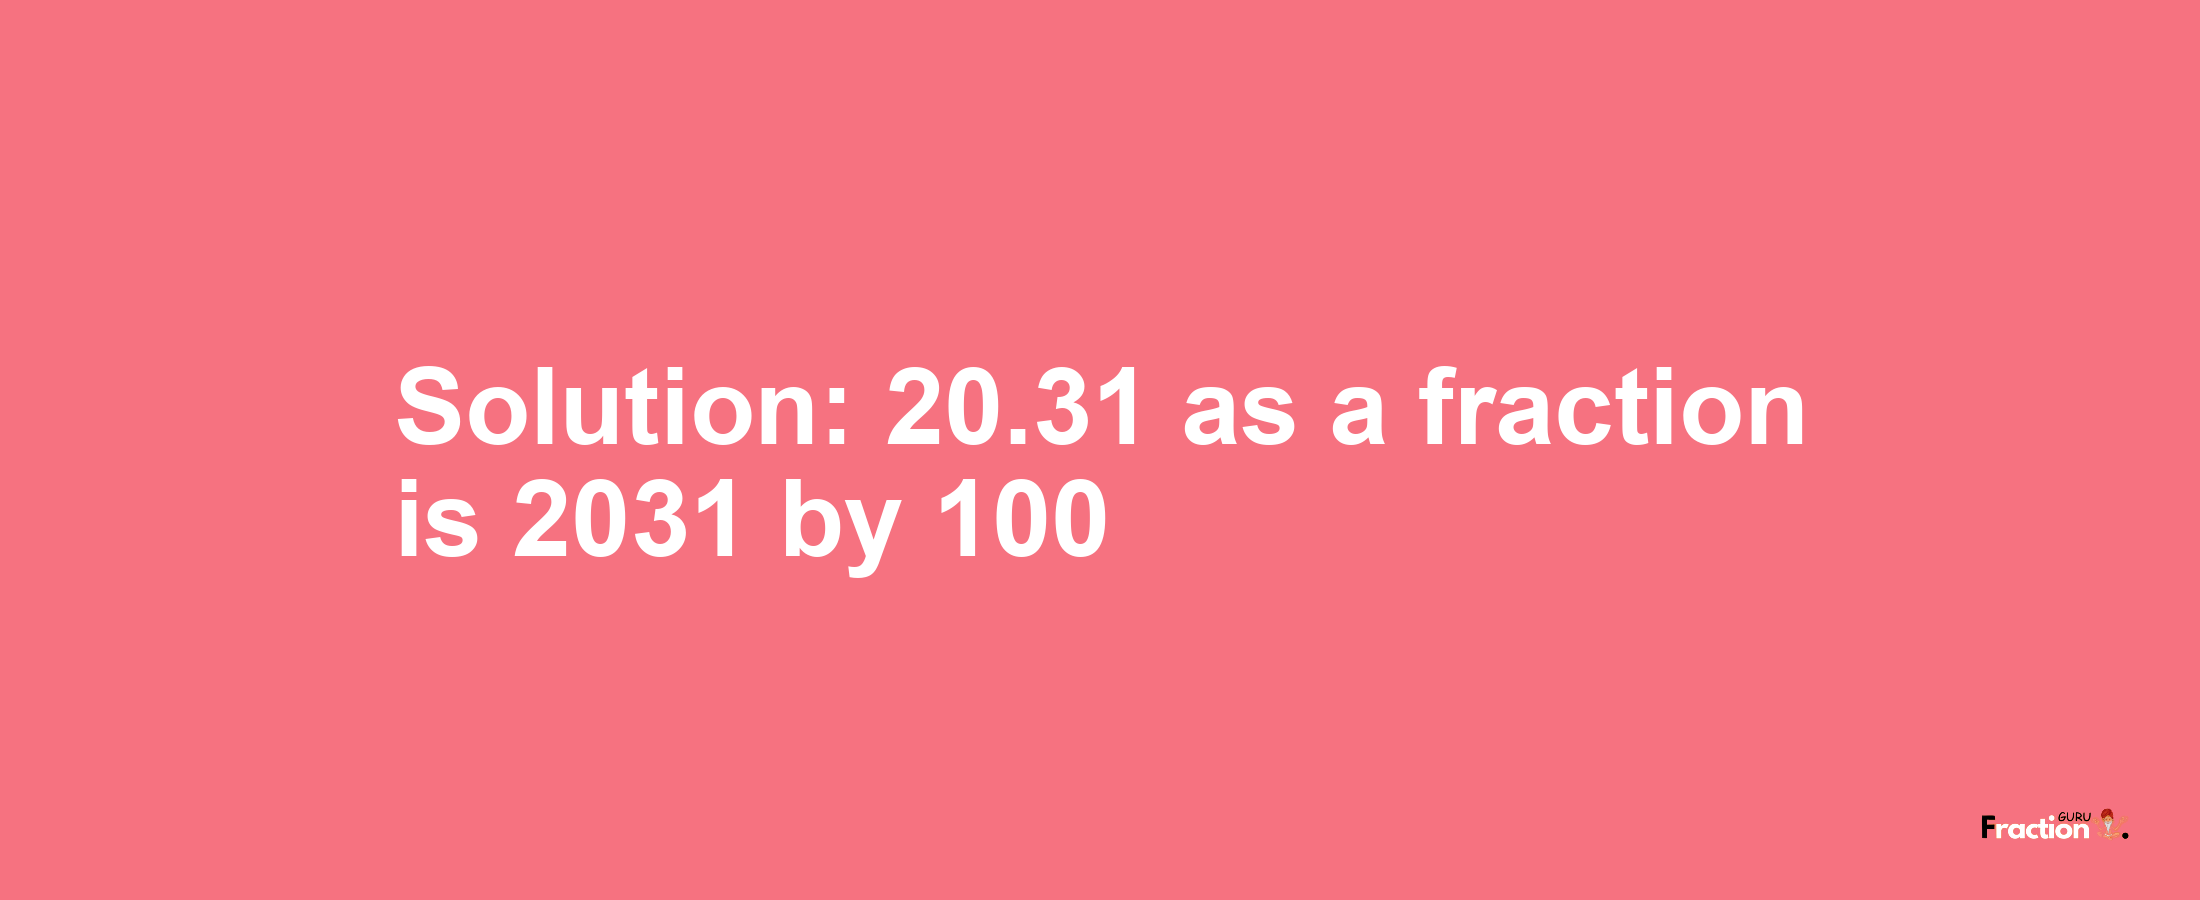 Solution:20.31 as a fraction is 2031/100